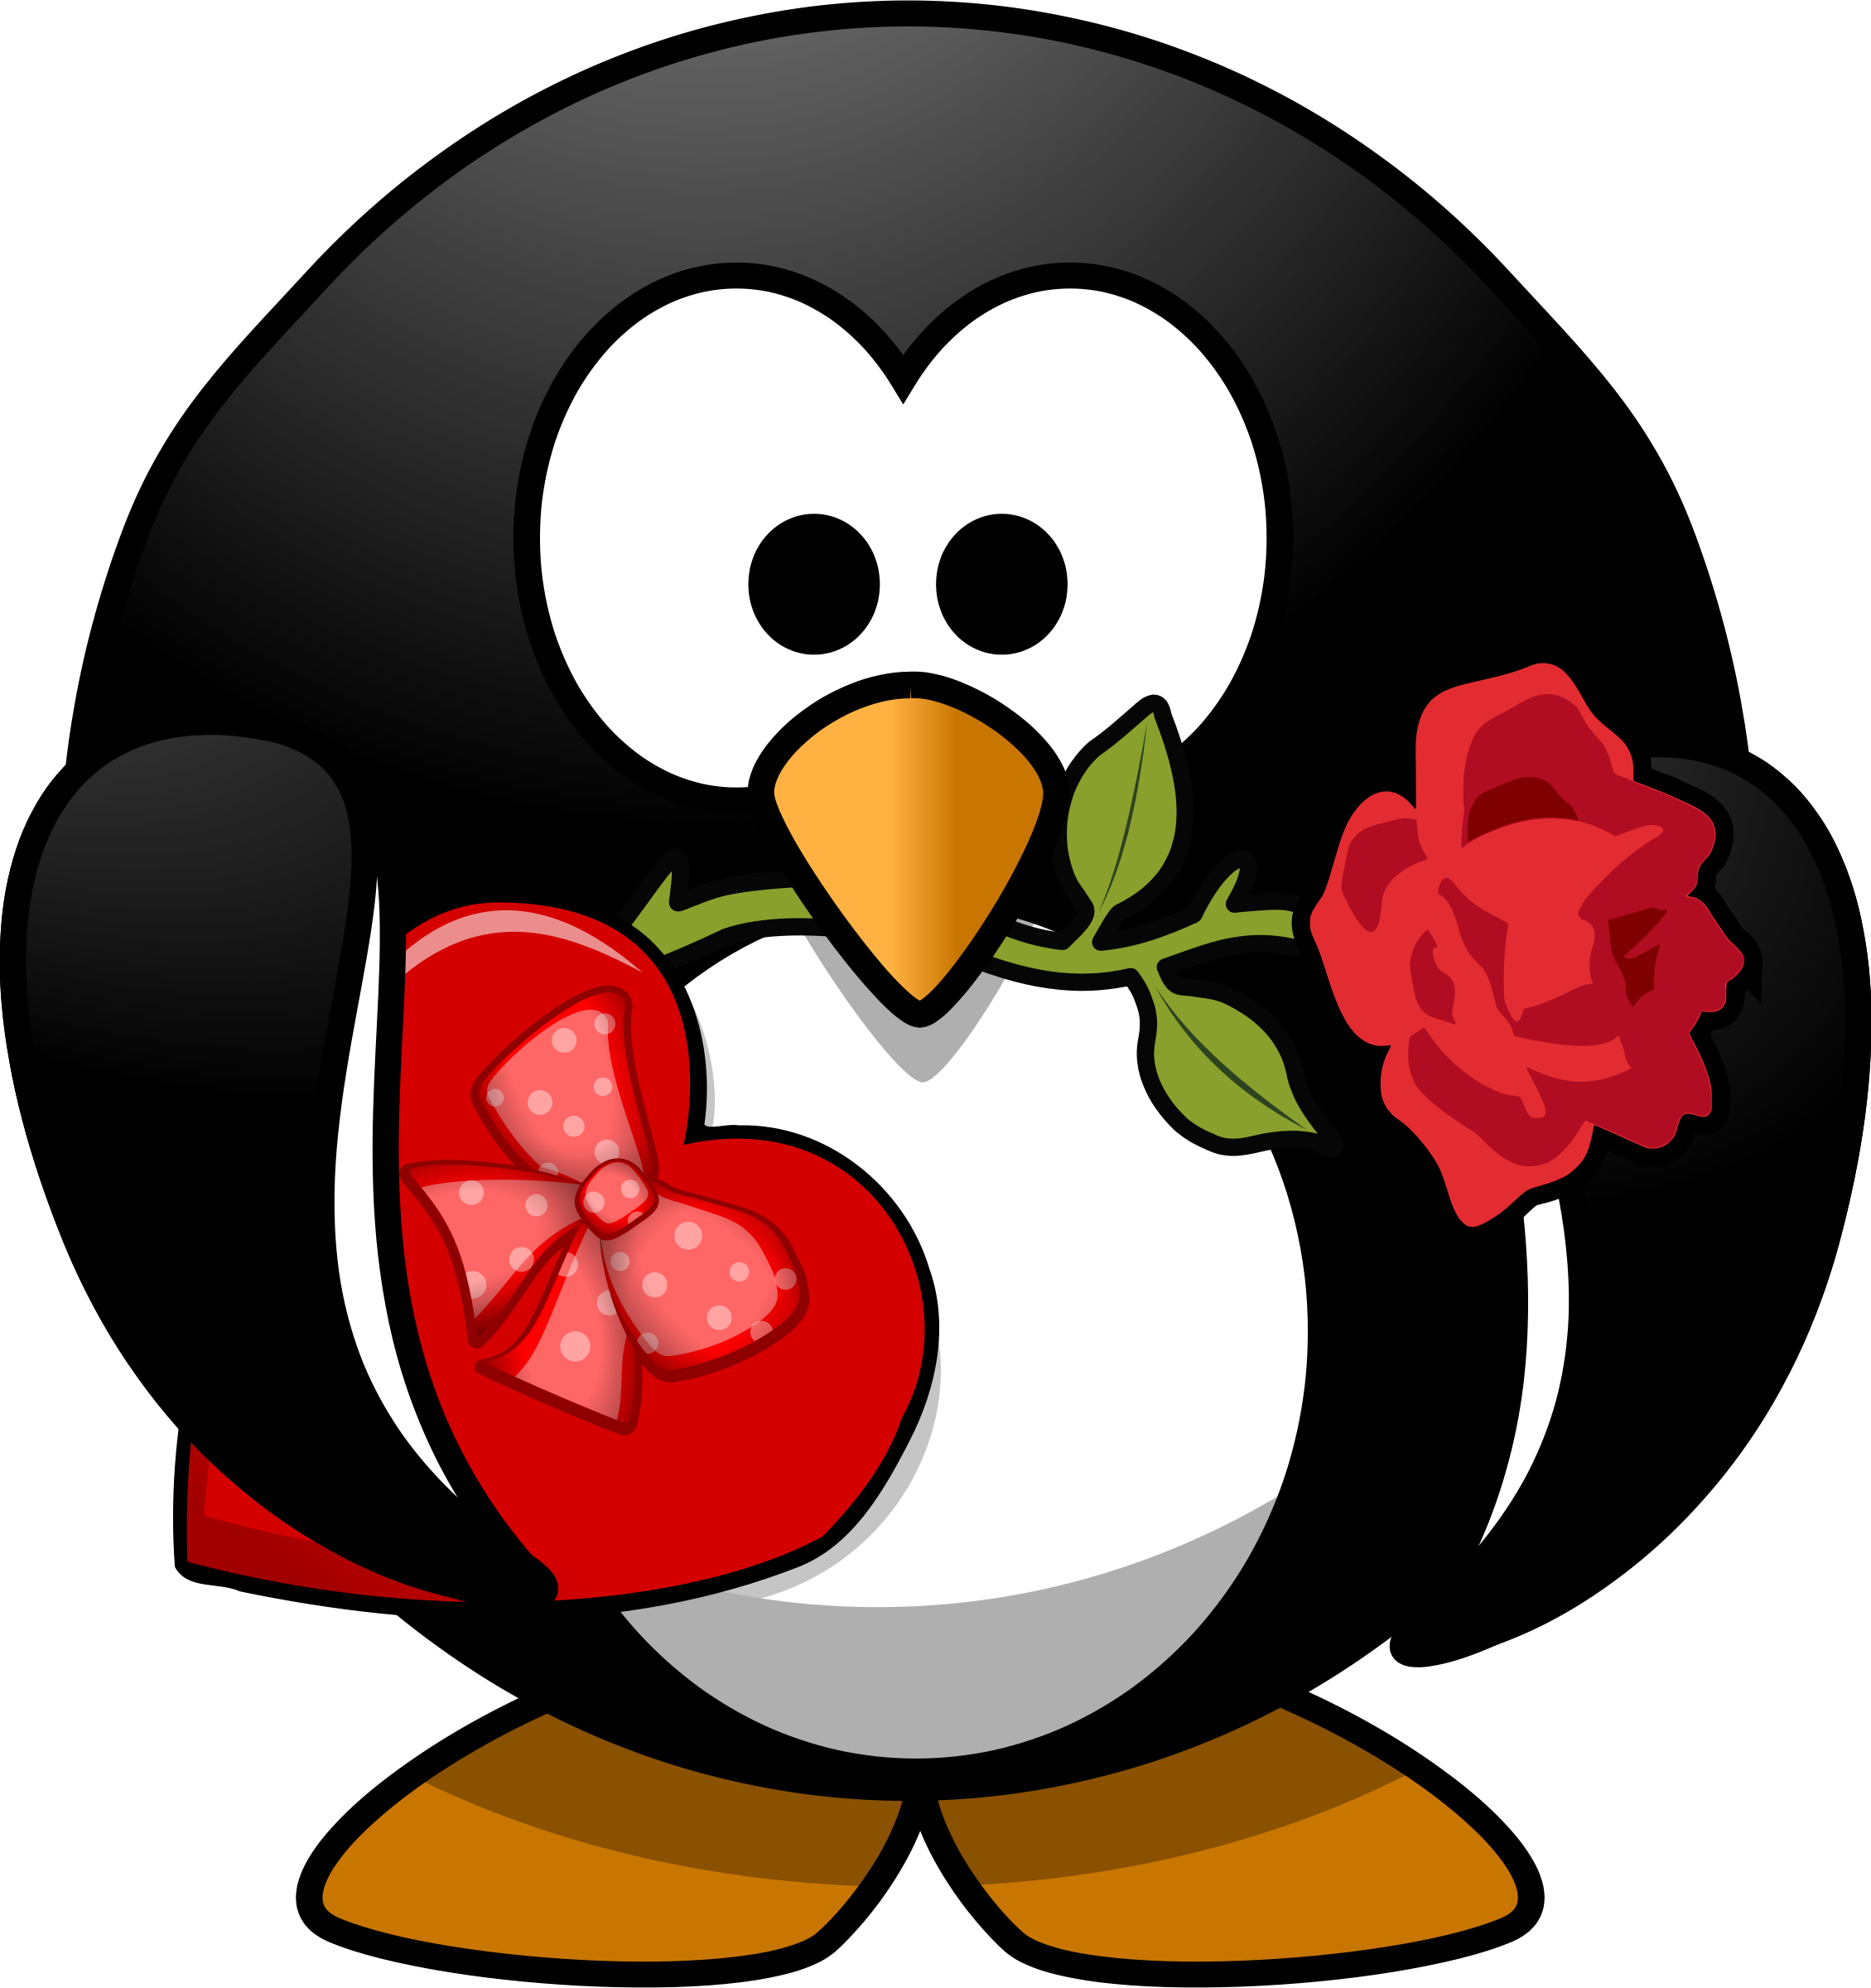 My Funny Valentine Clipart PNG and JPG Files.